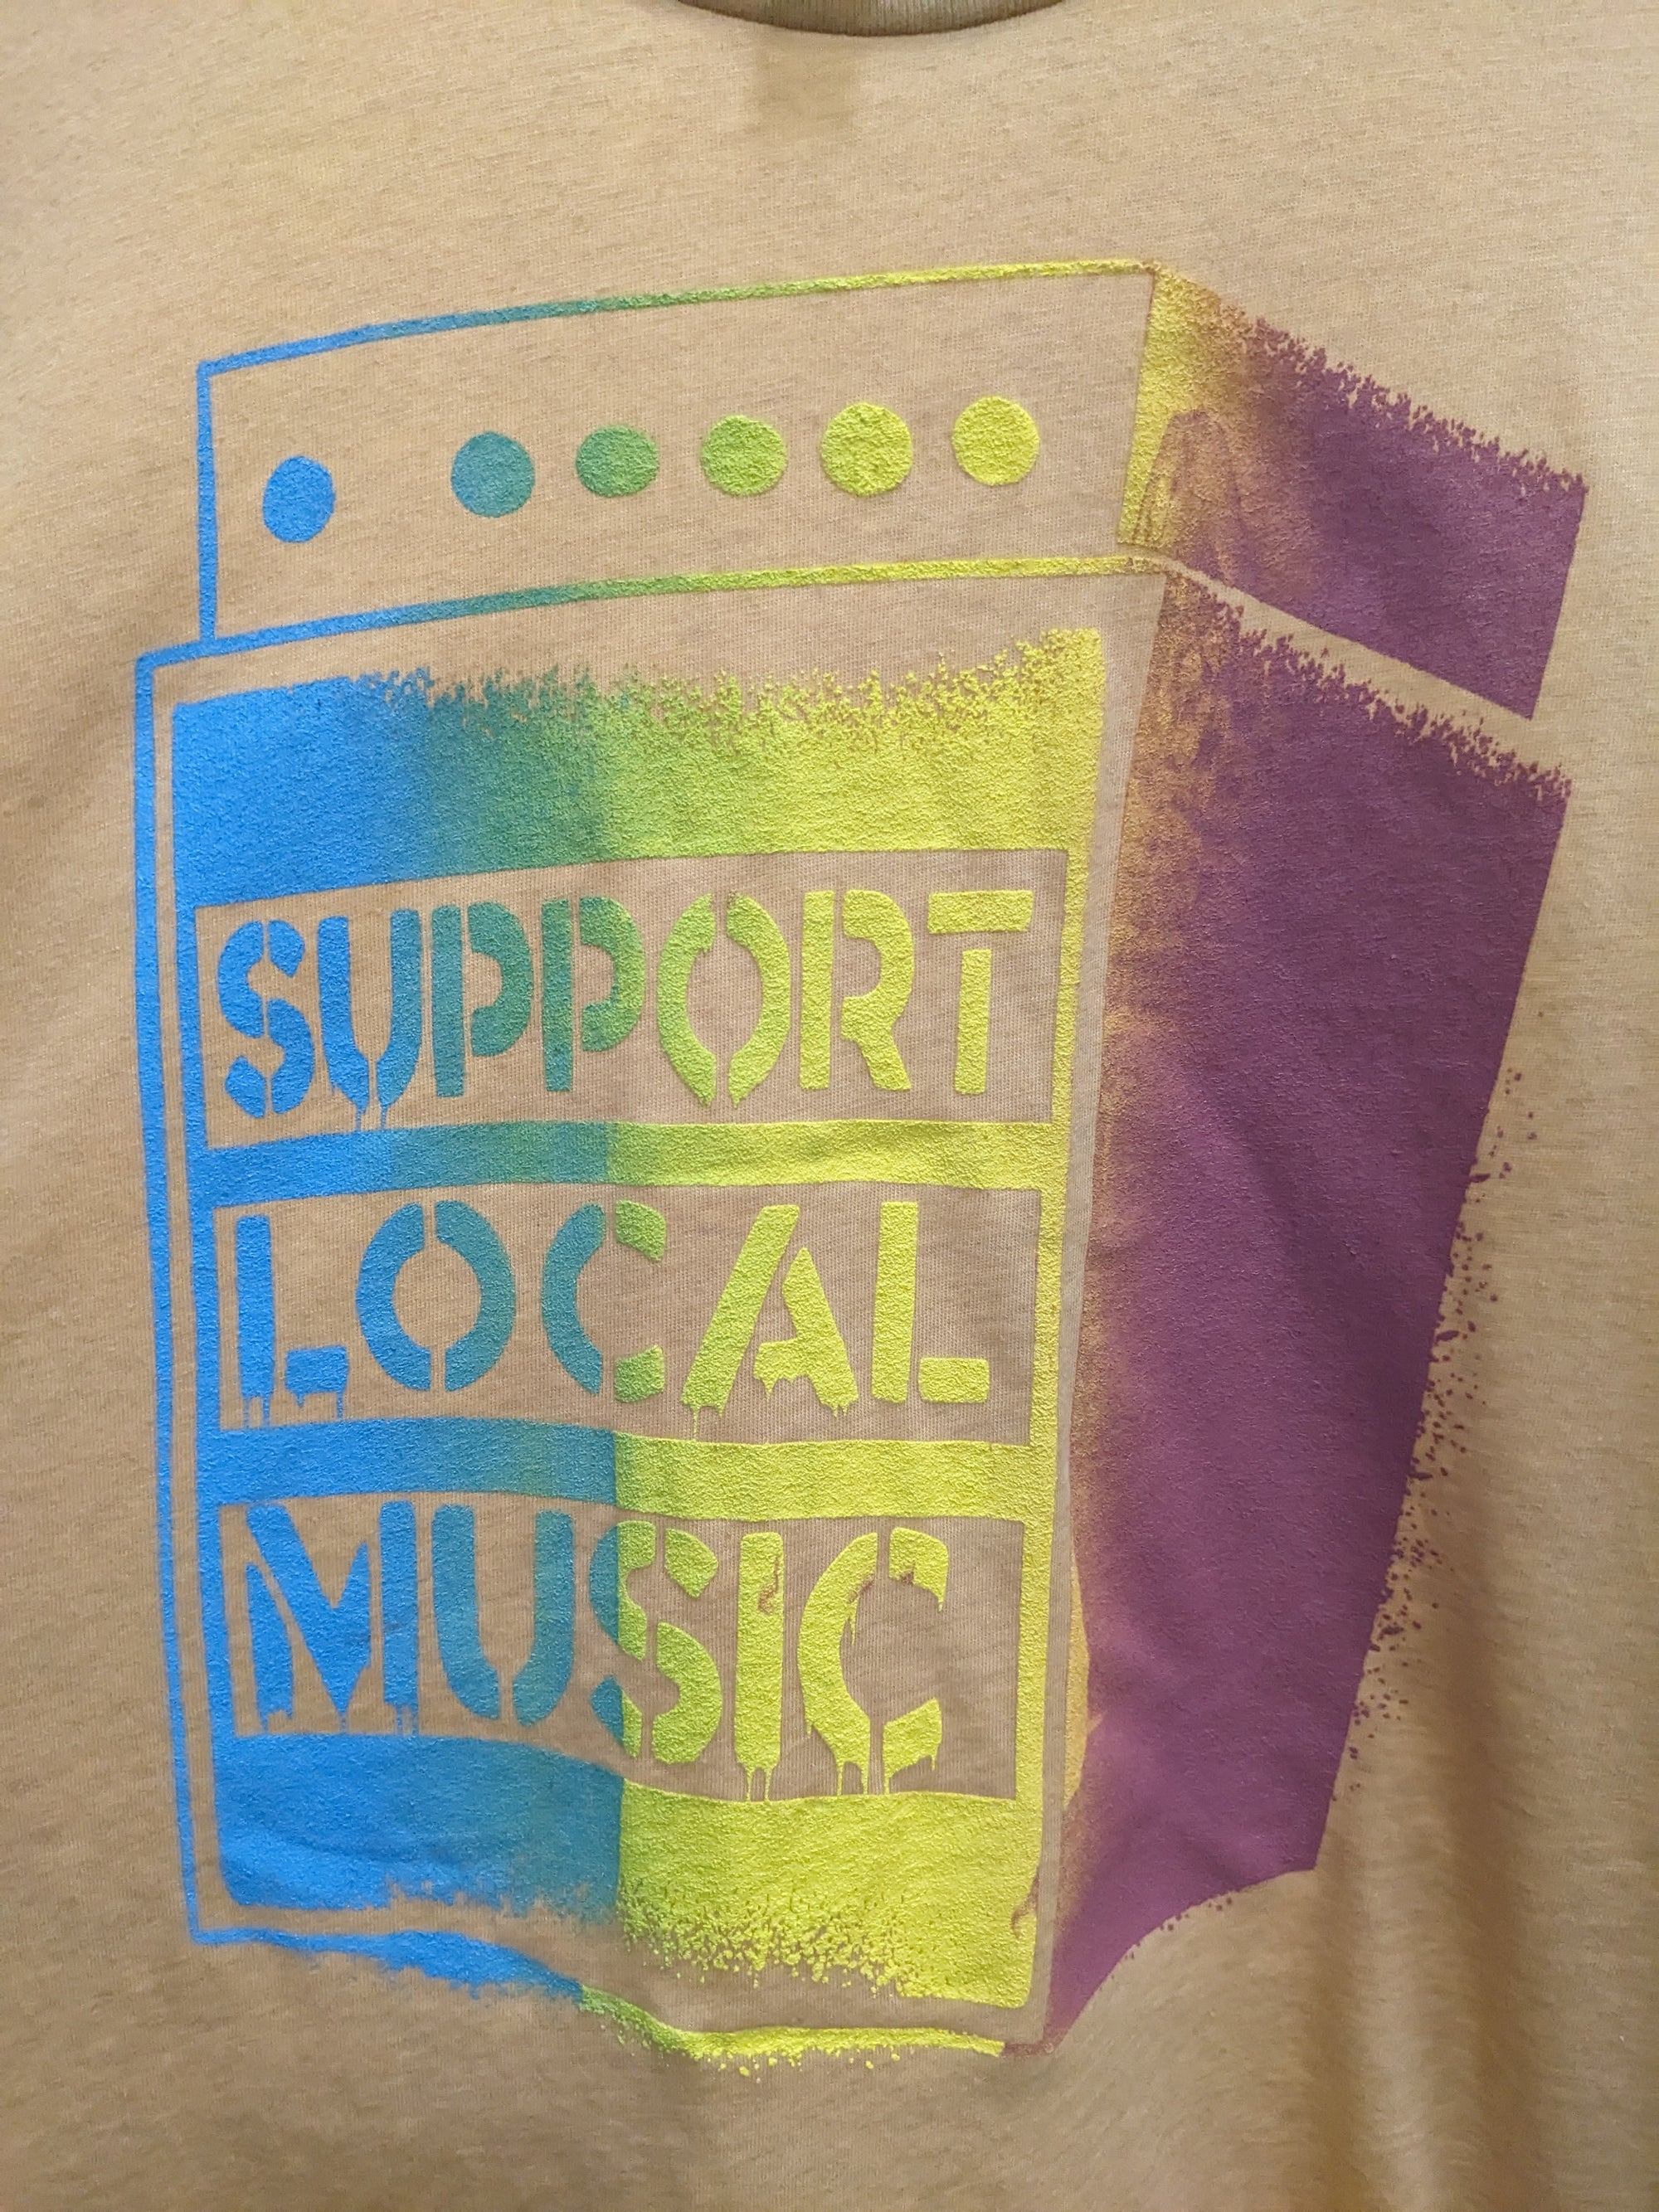 Support Local Music - Large